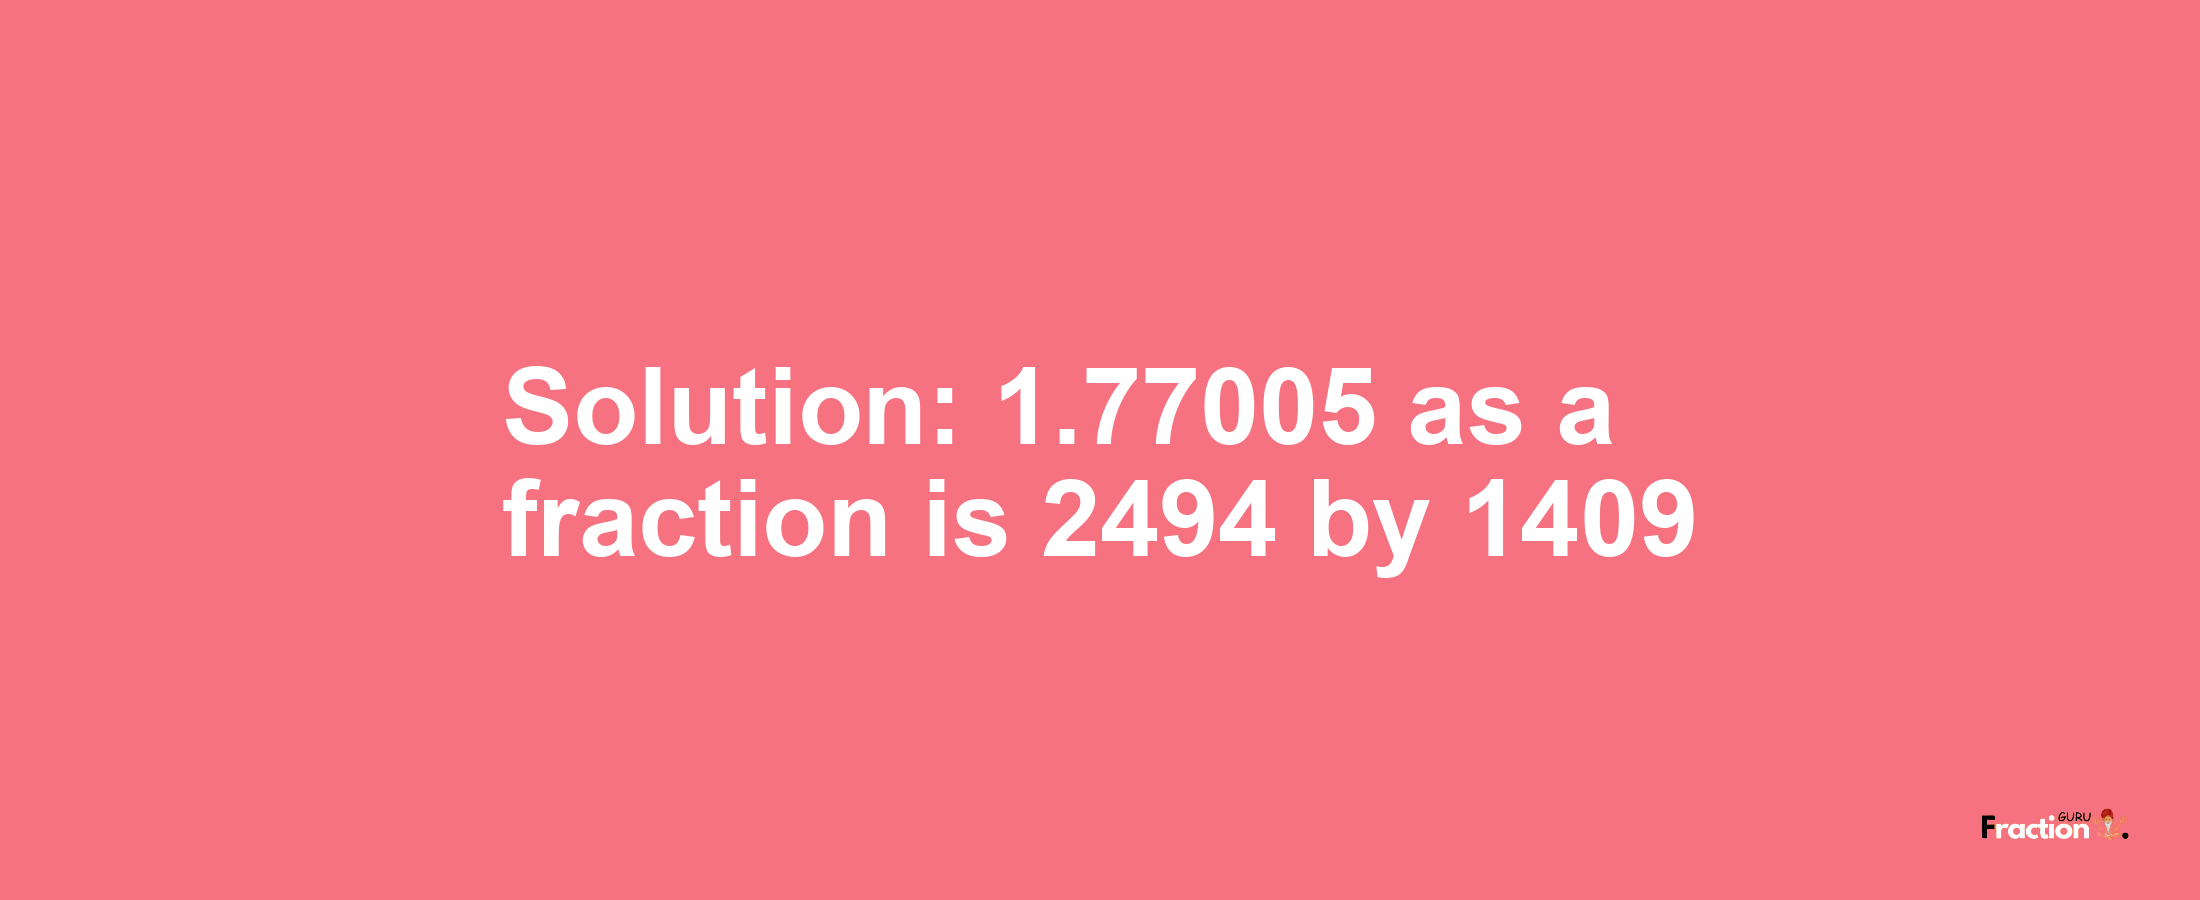 Solution:1.77005 as a fraction is 2494/1409